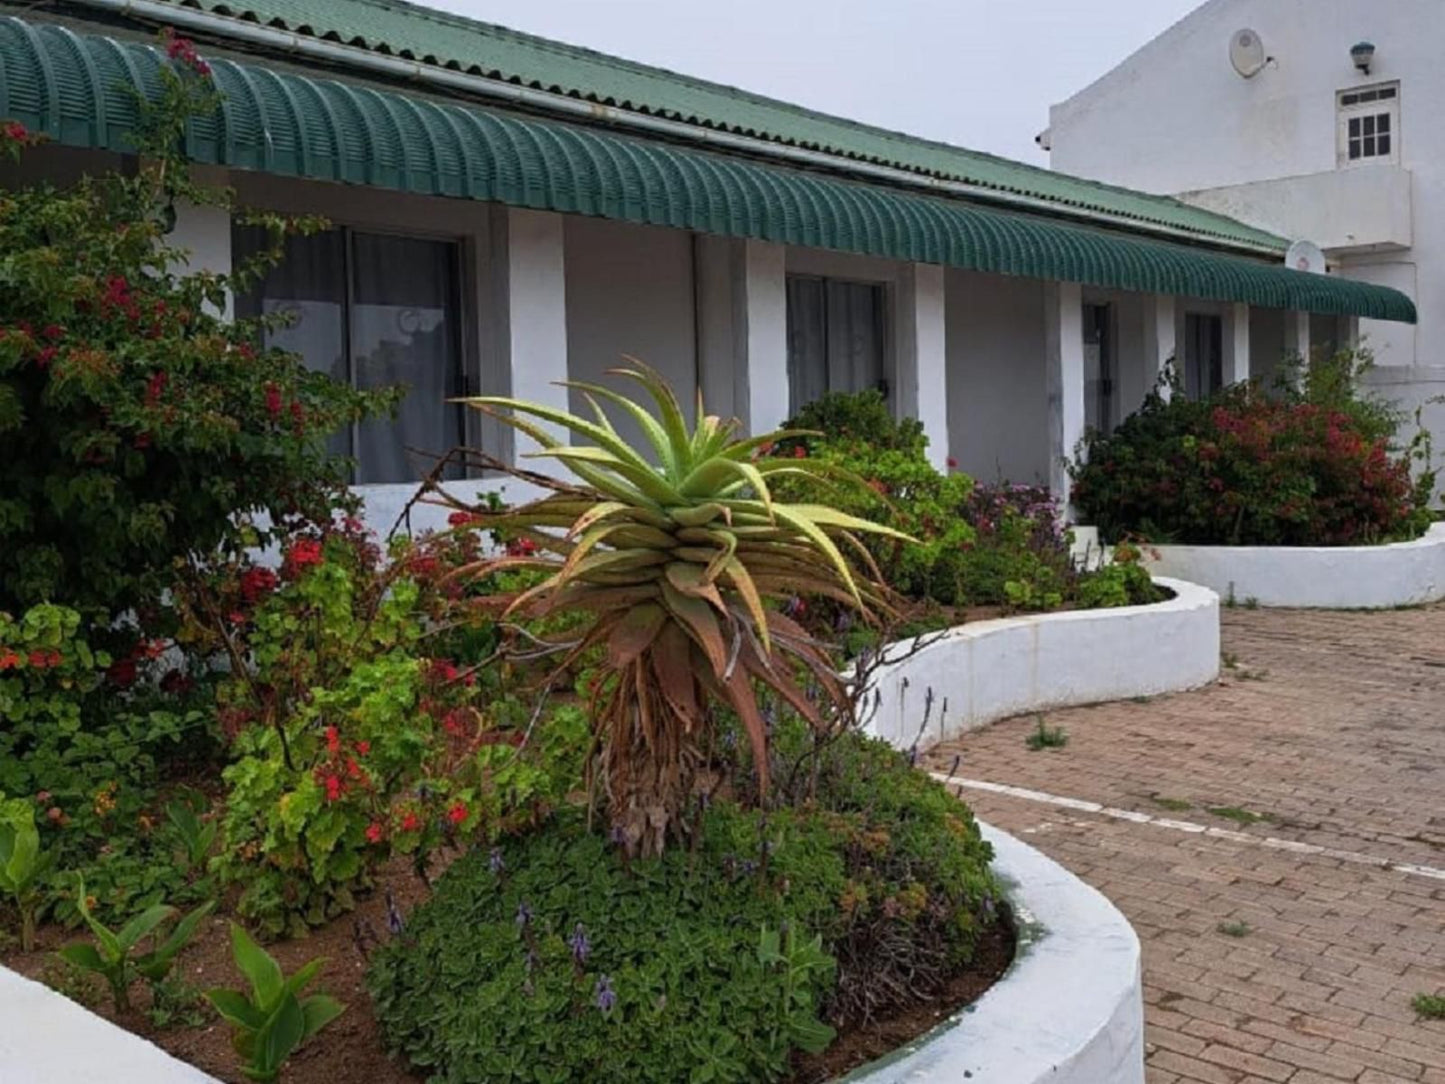 St Helena Bay Hotel St Helena Bay Western Cape South Africa House, Building, Architecture, Palm Tree, Plant, Nature, Wood